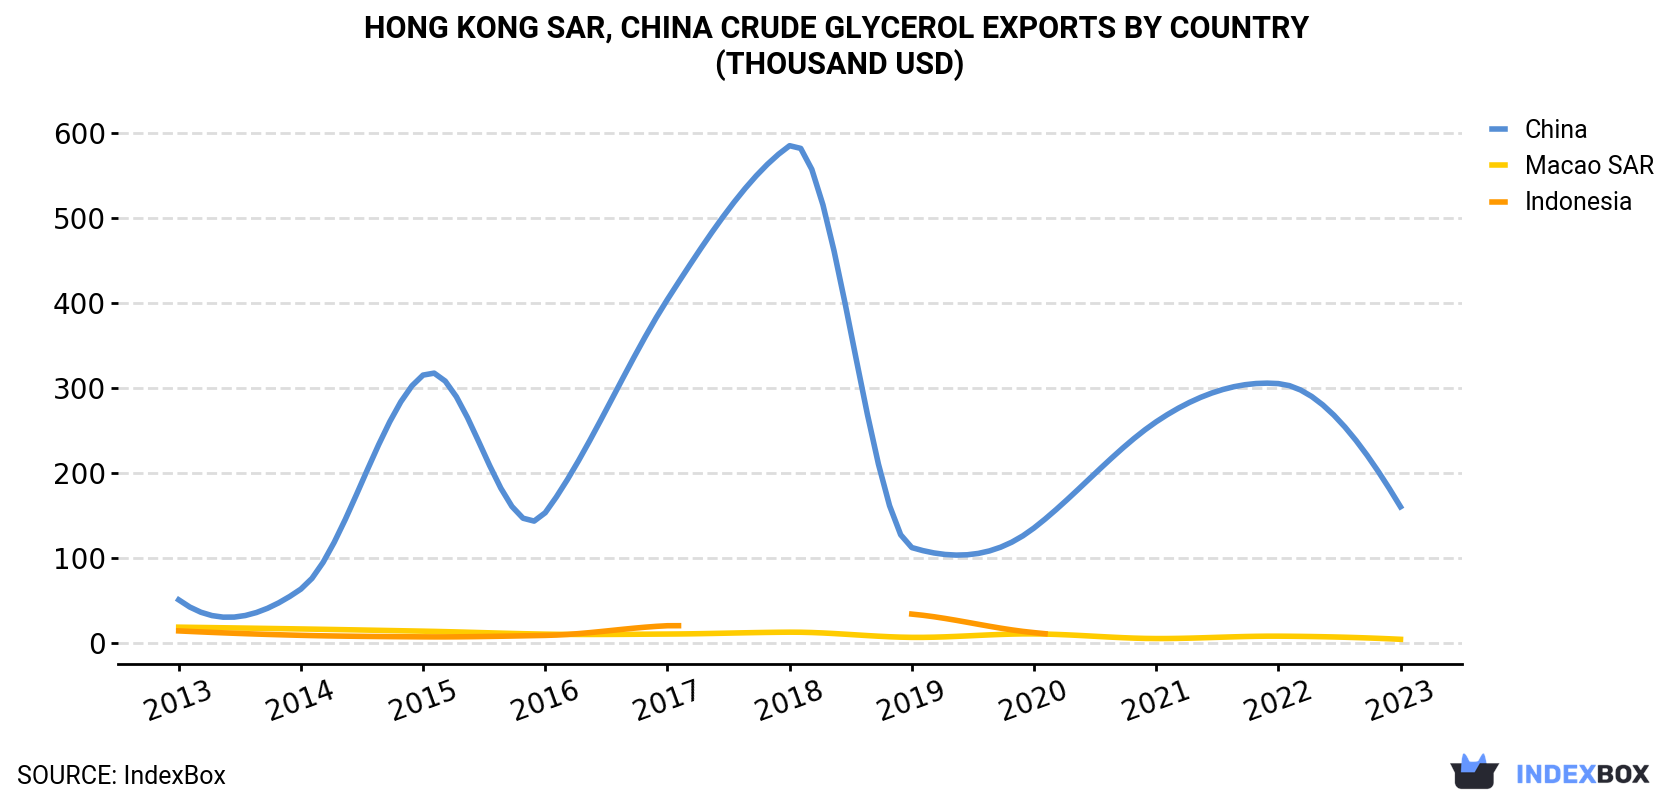 Hong Kong Crude Glycerol Exports By Country (Thousand USD)